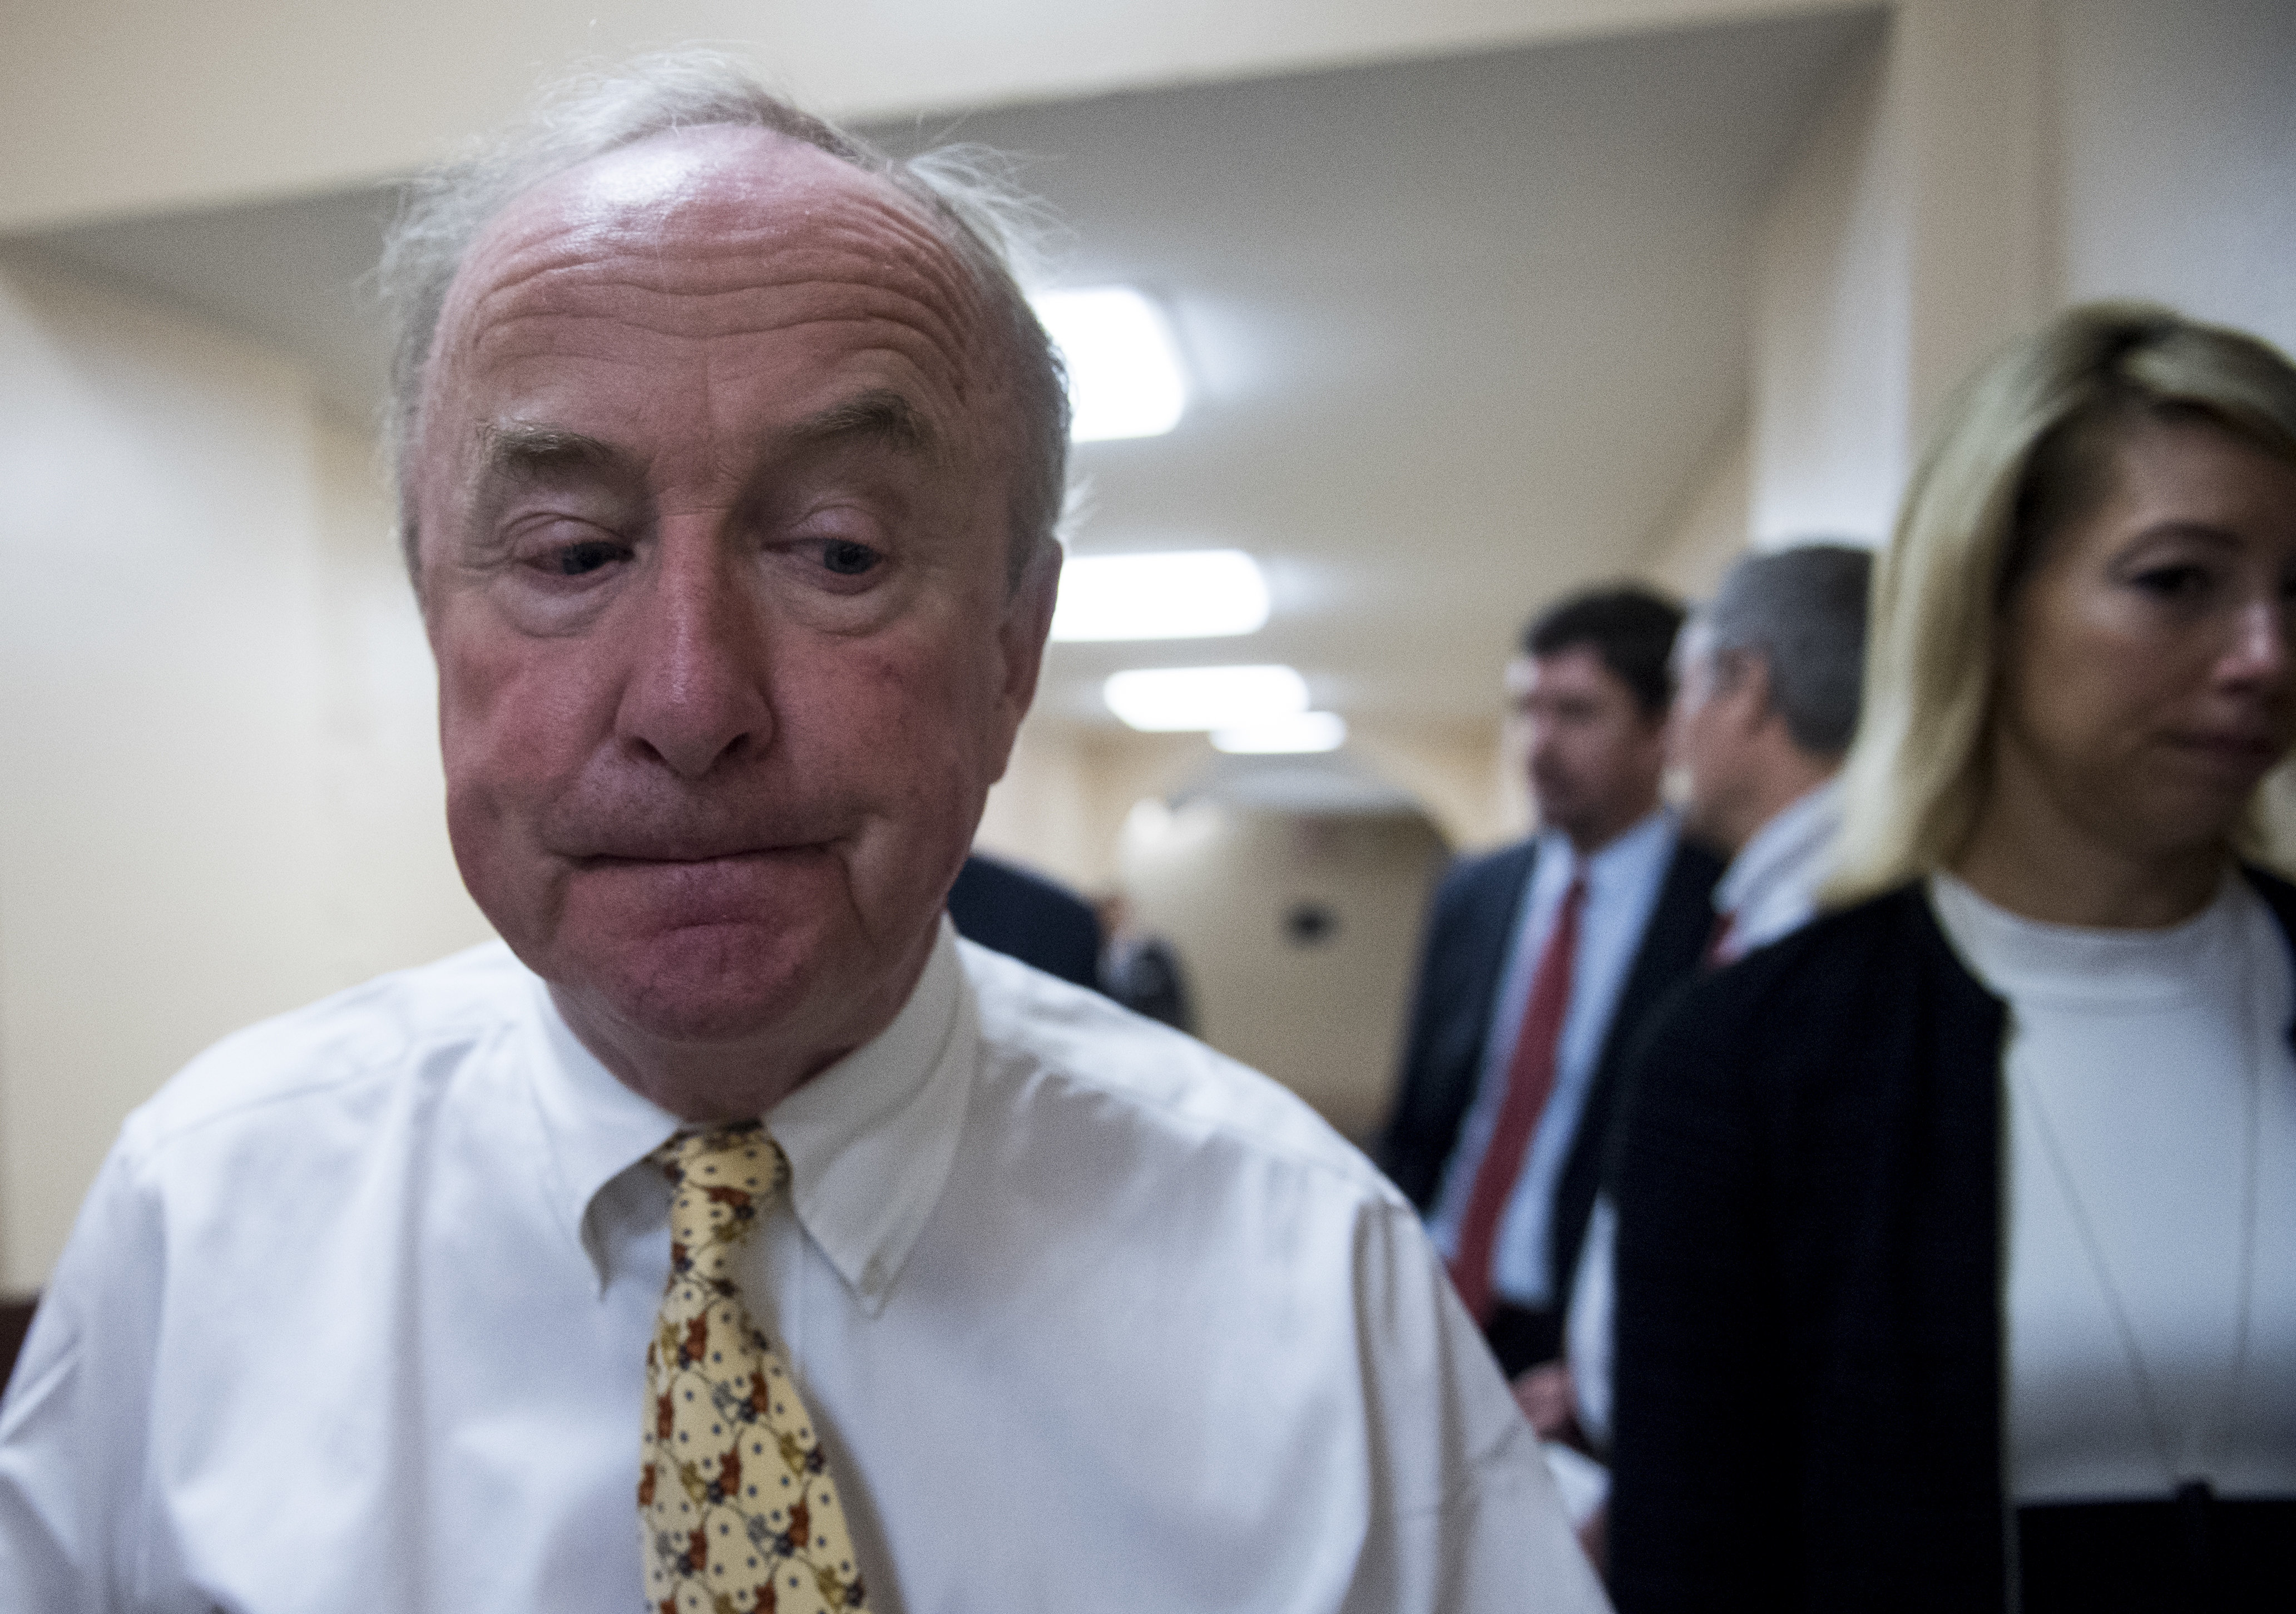 Rep. Rodney Frelinghuysen’s retirement could set off a race for the top spot on the Appropriations Committee